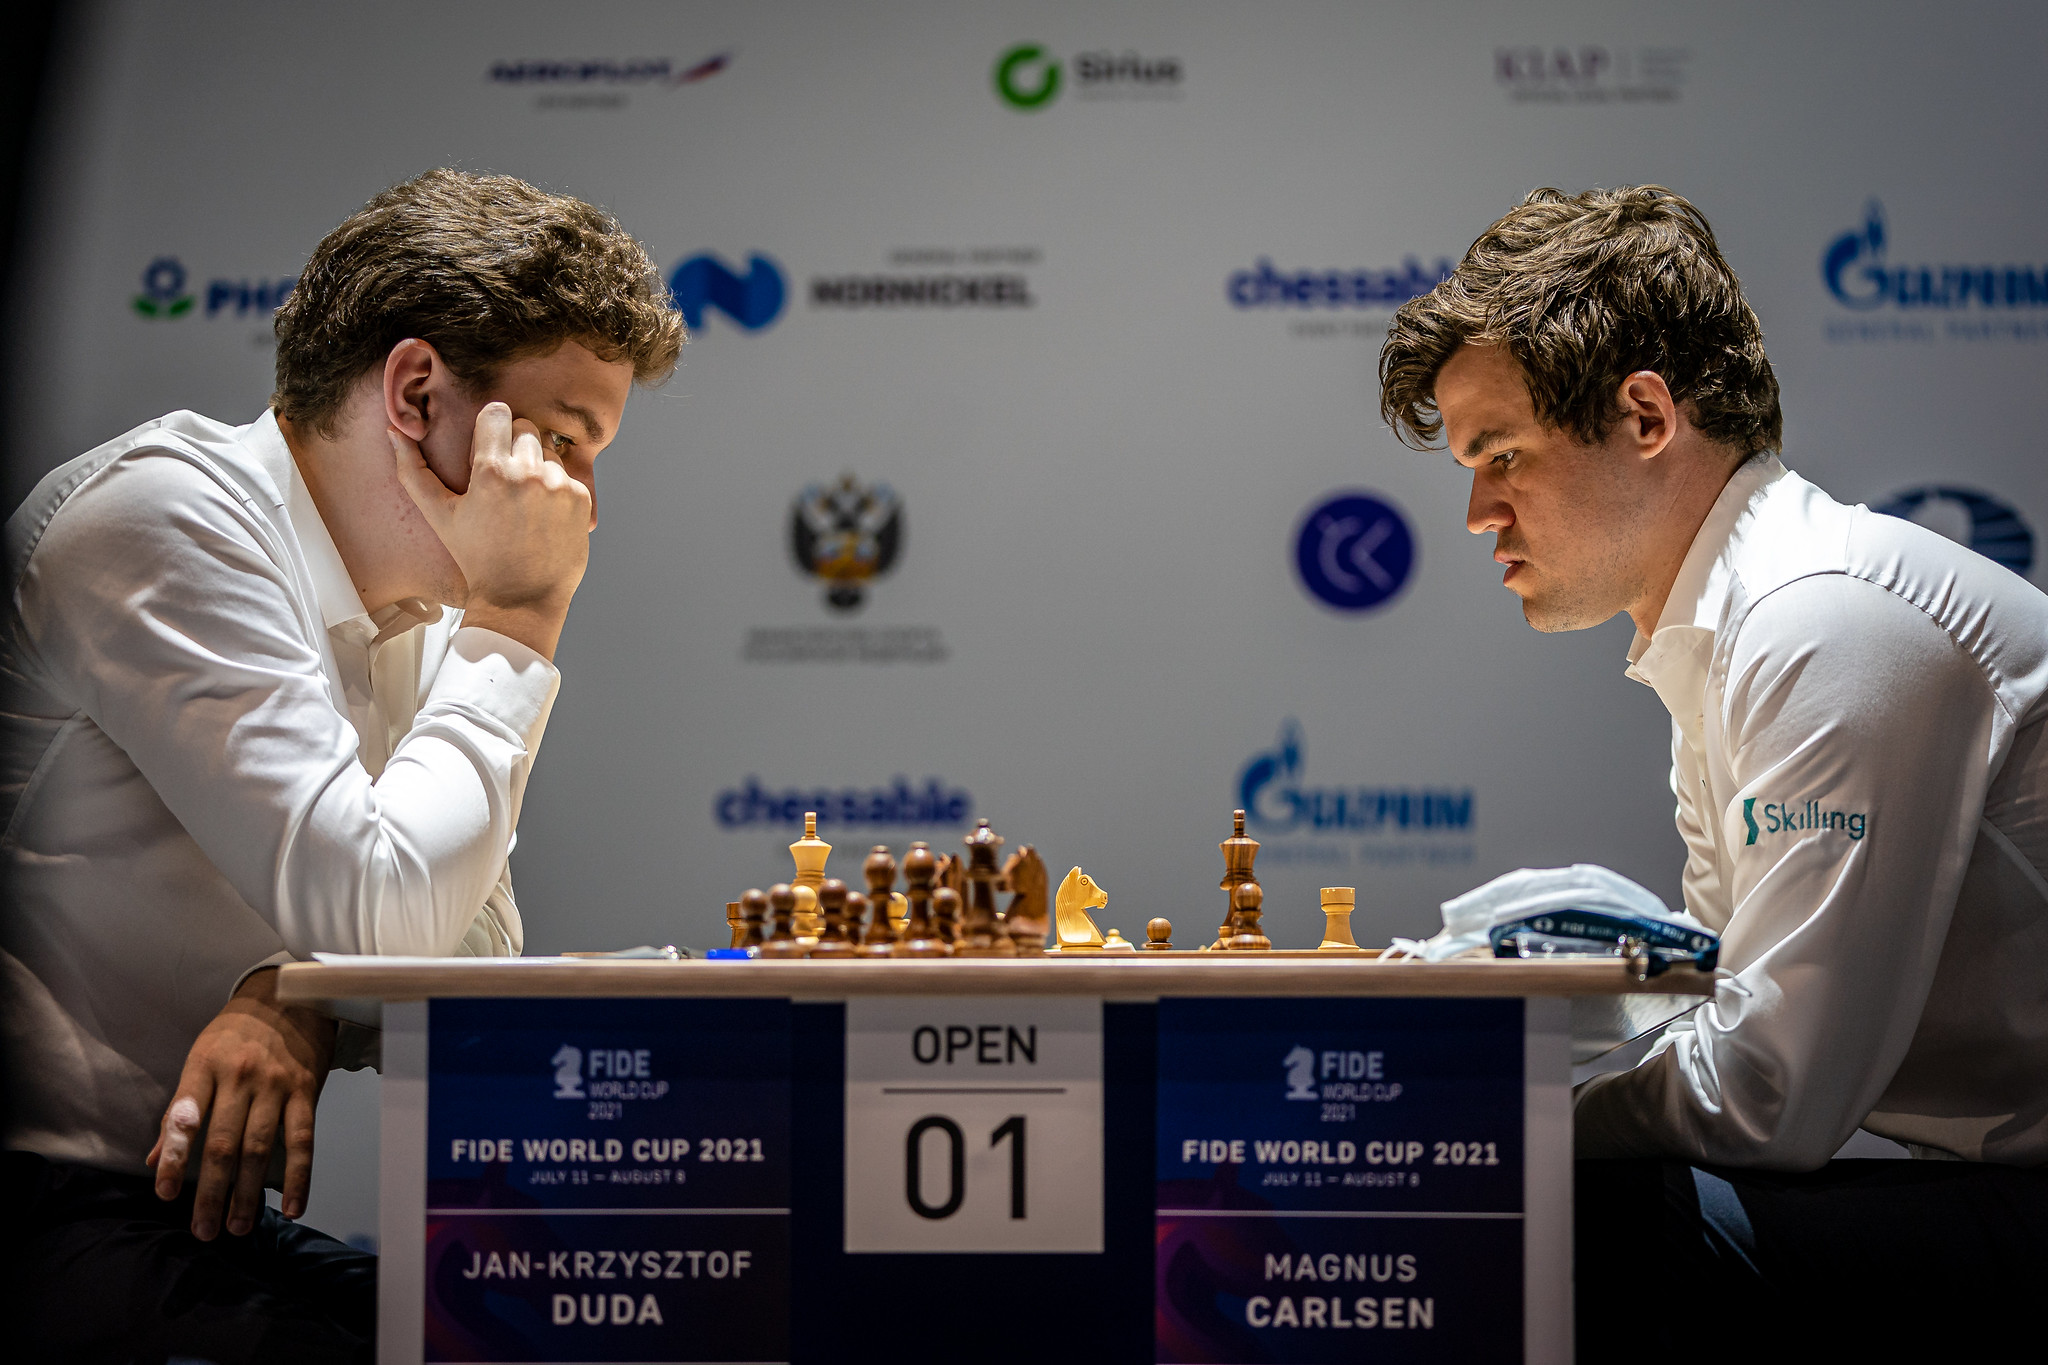 chess24 - Congratulations to Magnus Carlsen on winning the Superbet Rapid &  Blitz despite an absolutely heroic fight by Jan-Krzysztof Duda in the final  game!